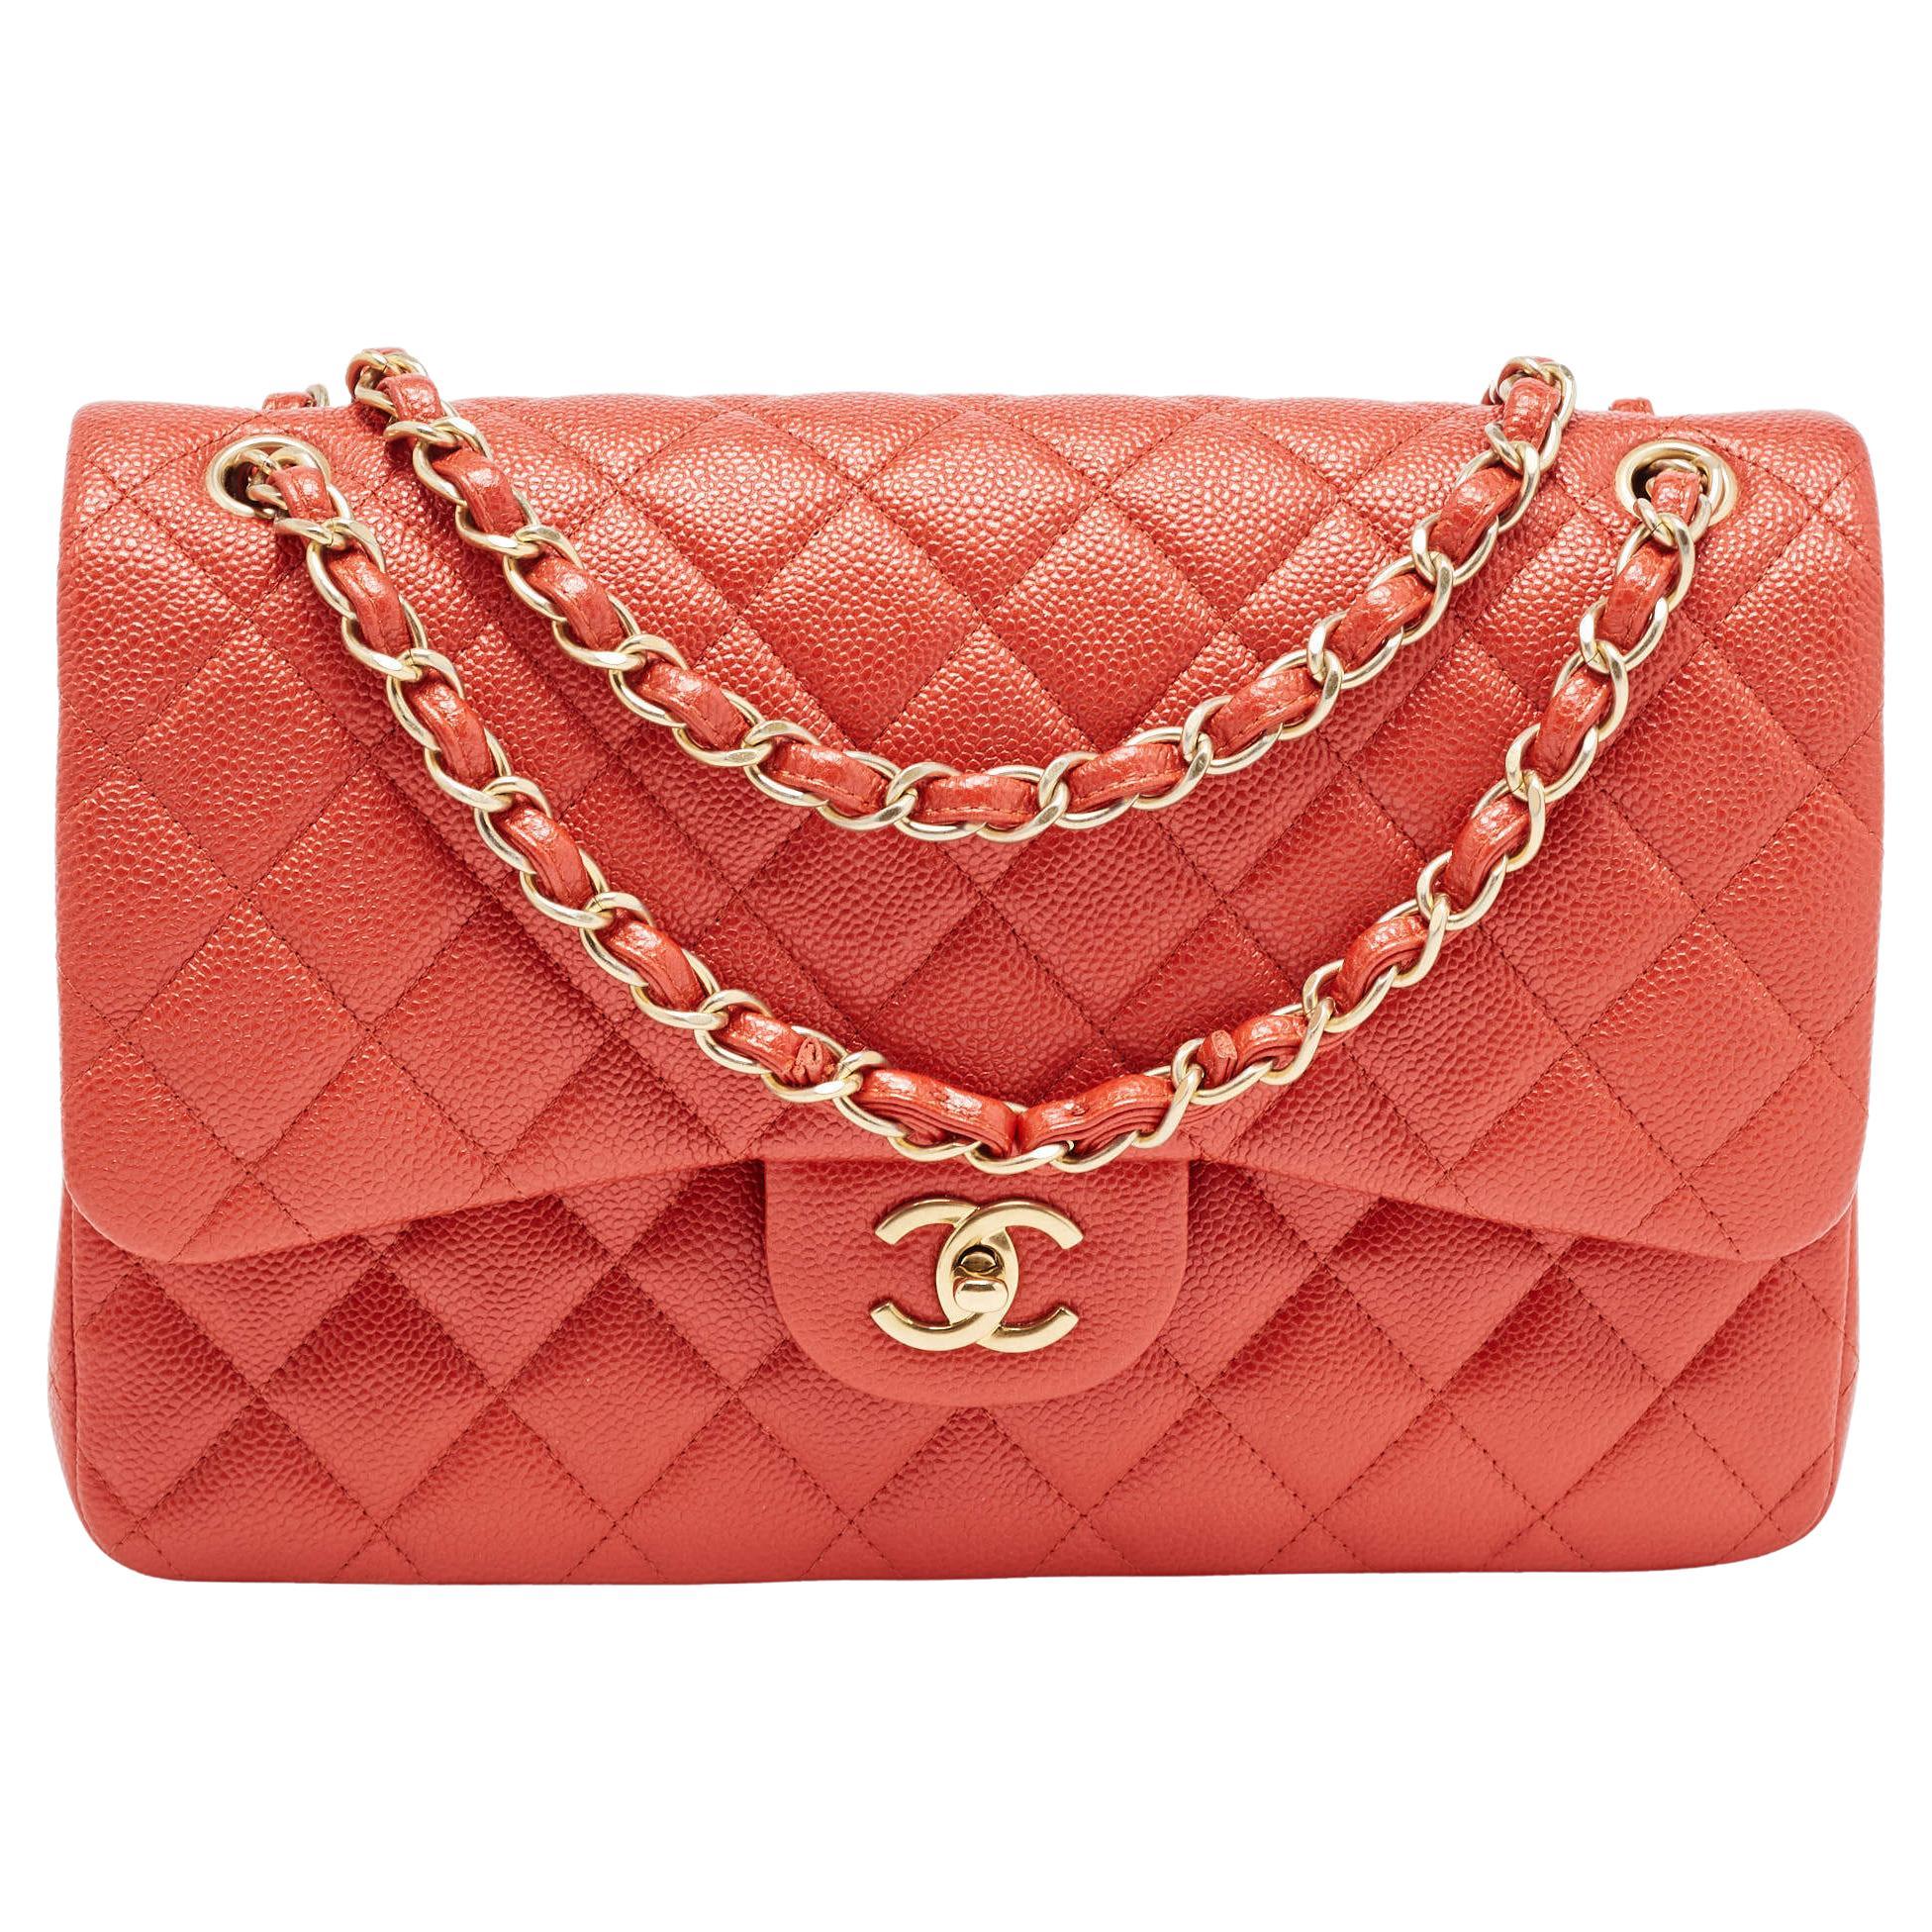 Chanel Orange Quilted Pearly Caviar Leather Jumbo Classic Double Flap Bag